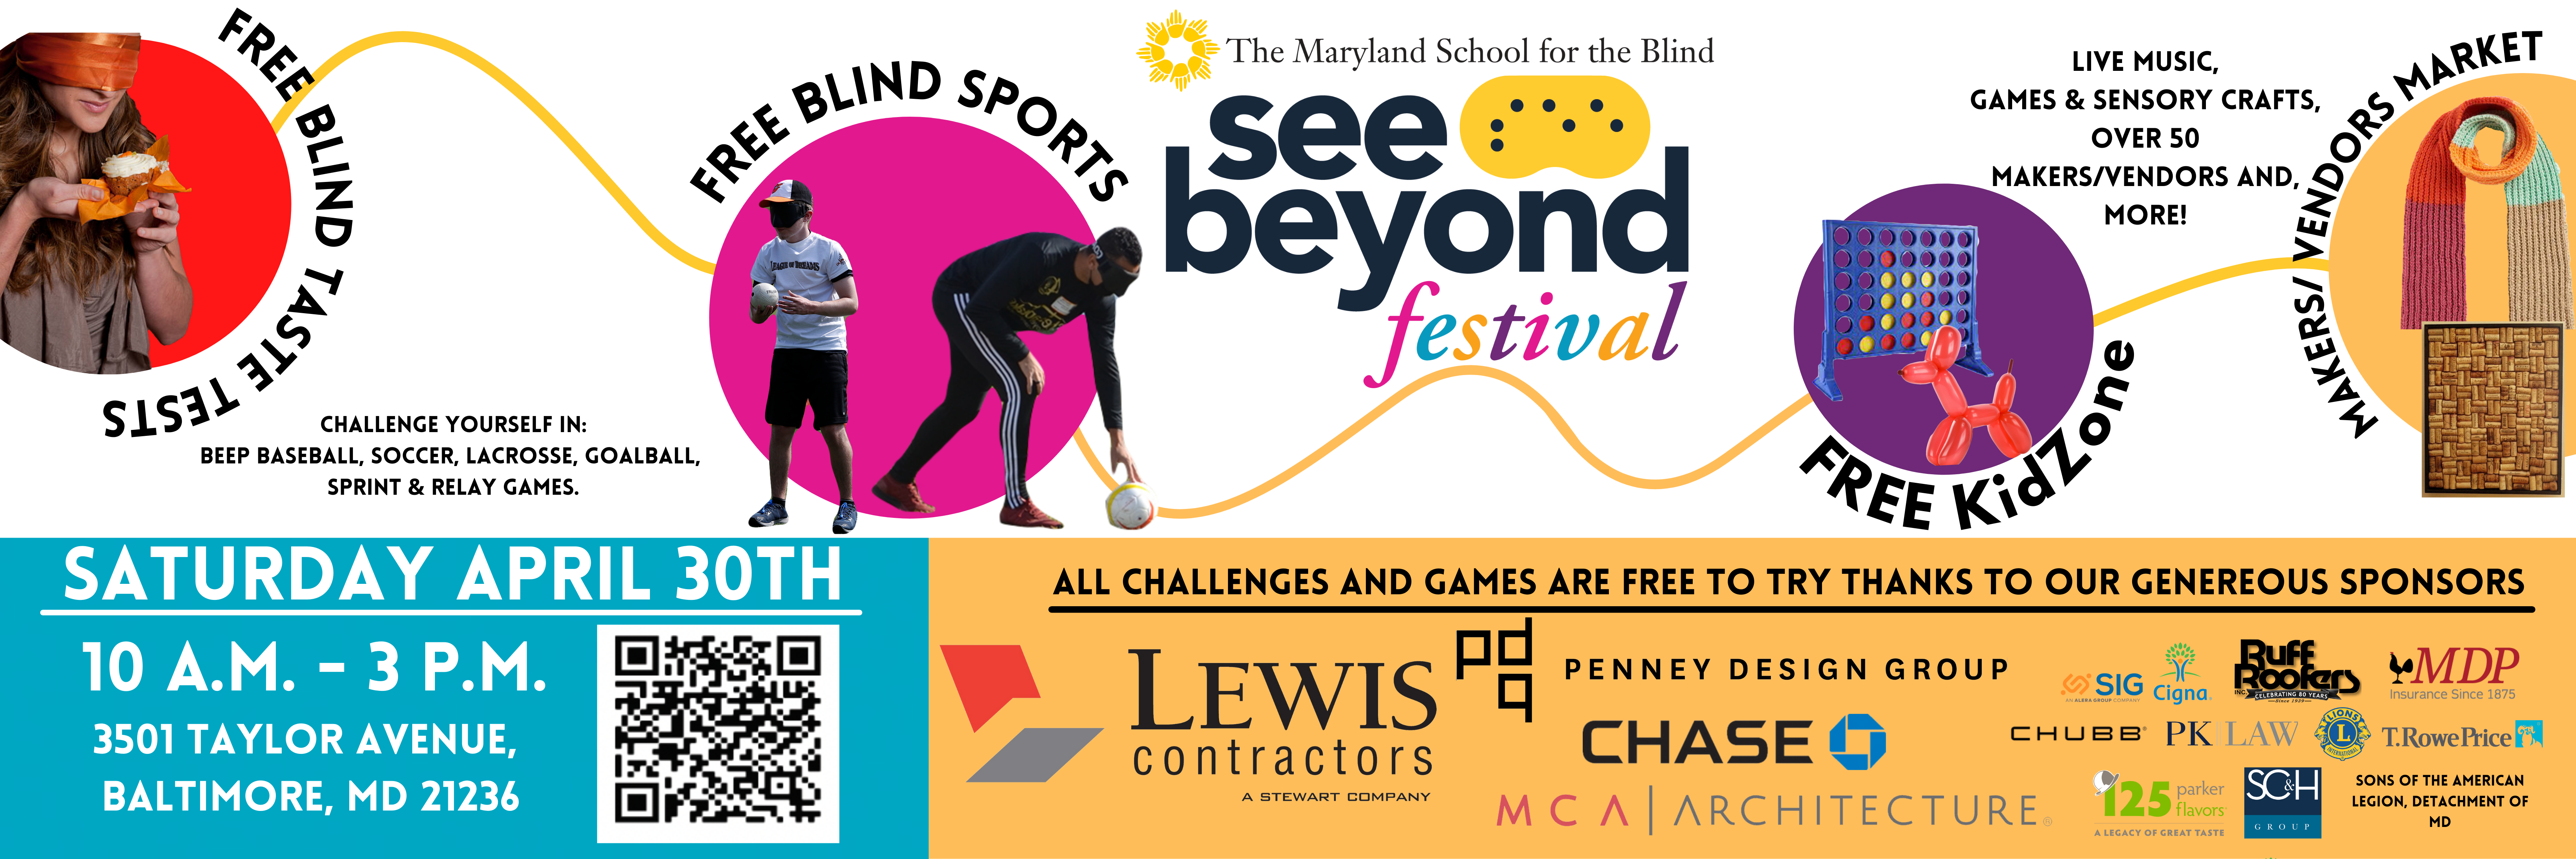 See Beyond Festival banner featuring a young male in eyeshades holding a catcher's mitt, a soccer player wearing eyeshades bent over holding soccer ball with one hand, a woman with a blindfold holding a plate with food on it, and a ballon animal shaped like a dog next to a connect four game, and a scarf and a bag representing the Marketplace for the event, saturday April 30, 2022 from 10 am to 3 pm. 